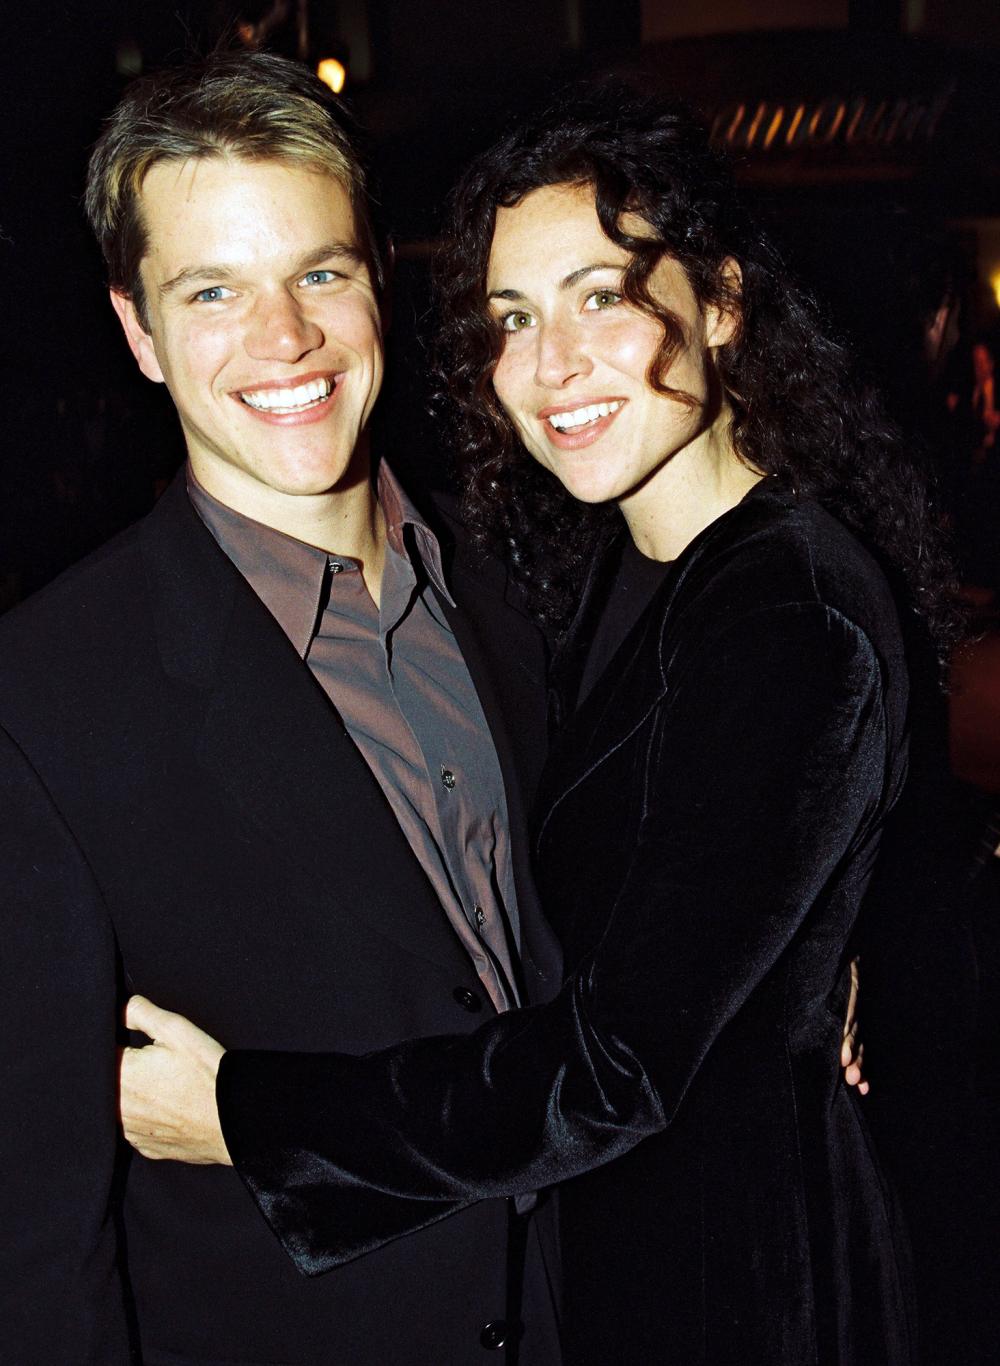 Minnie Driver Ran Into Ex Matt Damon for First Time in 20 Years: 'It All Felt Quite Middle-Aged'